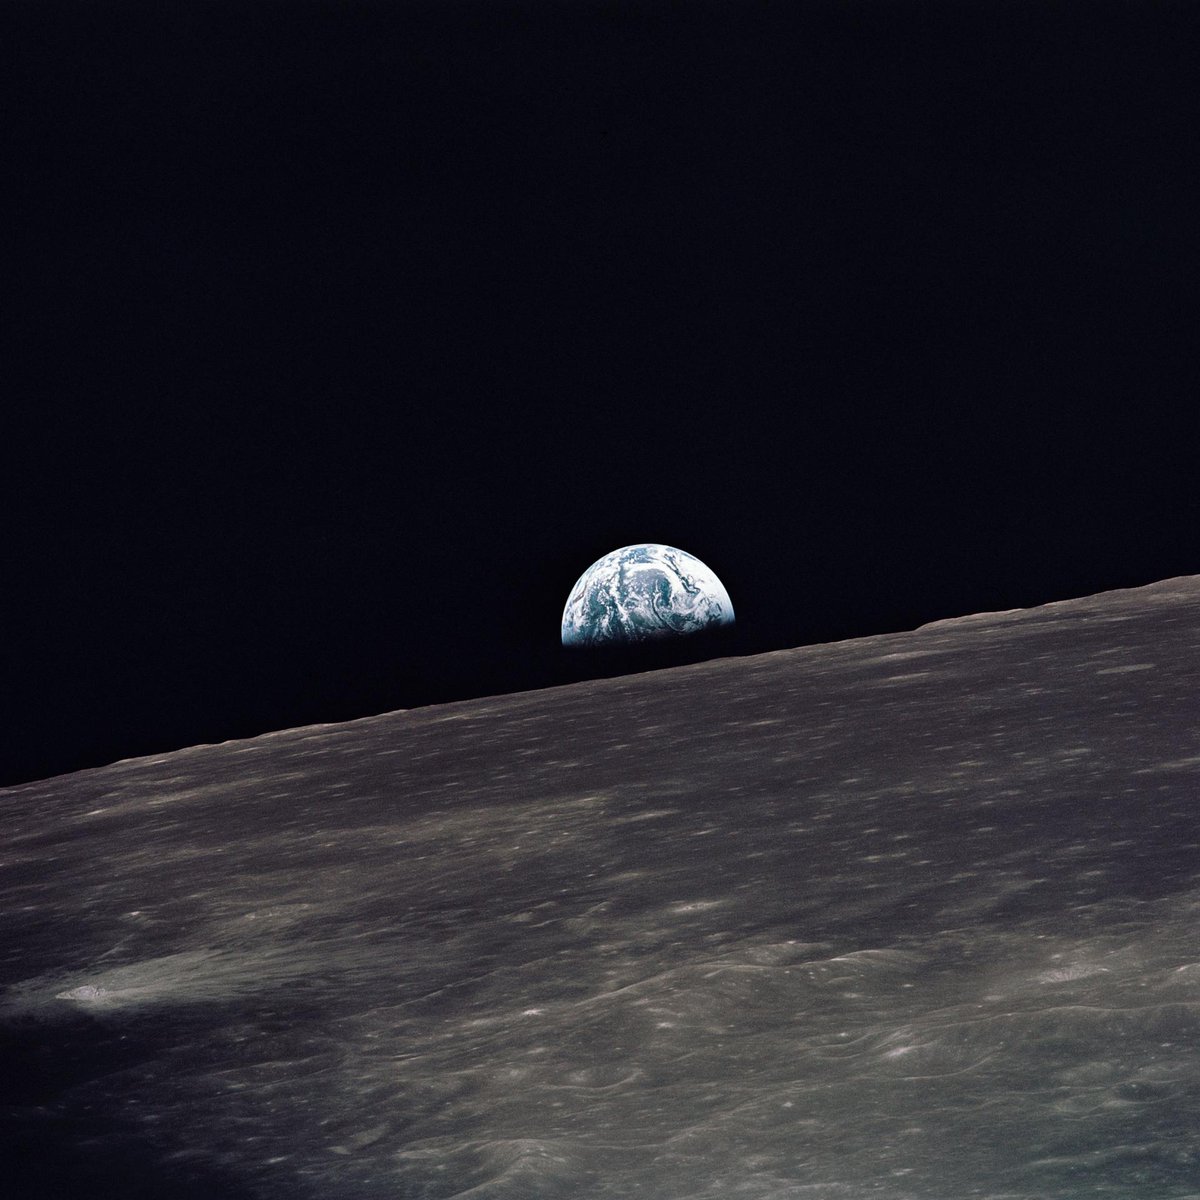 On #TDIH in 1969, the Apollo 10 astronauts began their return journey from the Moon back to Earth in command module 'Charlie Brown.' This photo of Earth rising above the lunar horizon was taken during the mission.